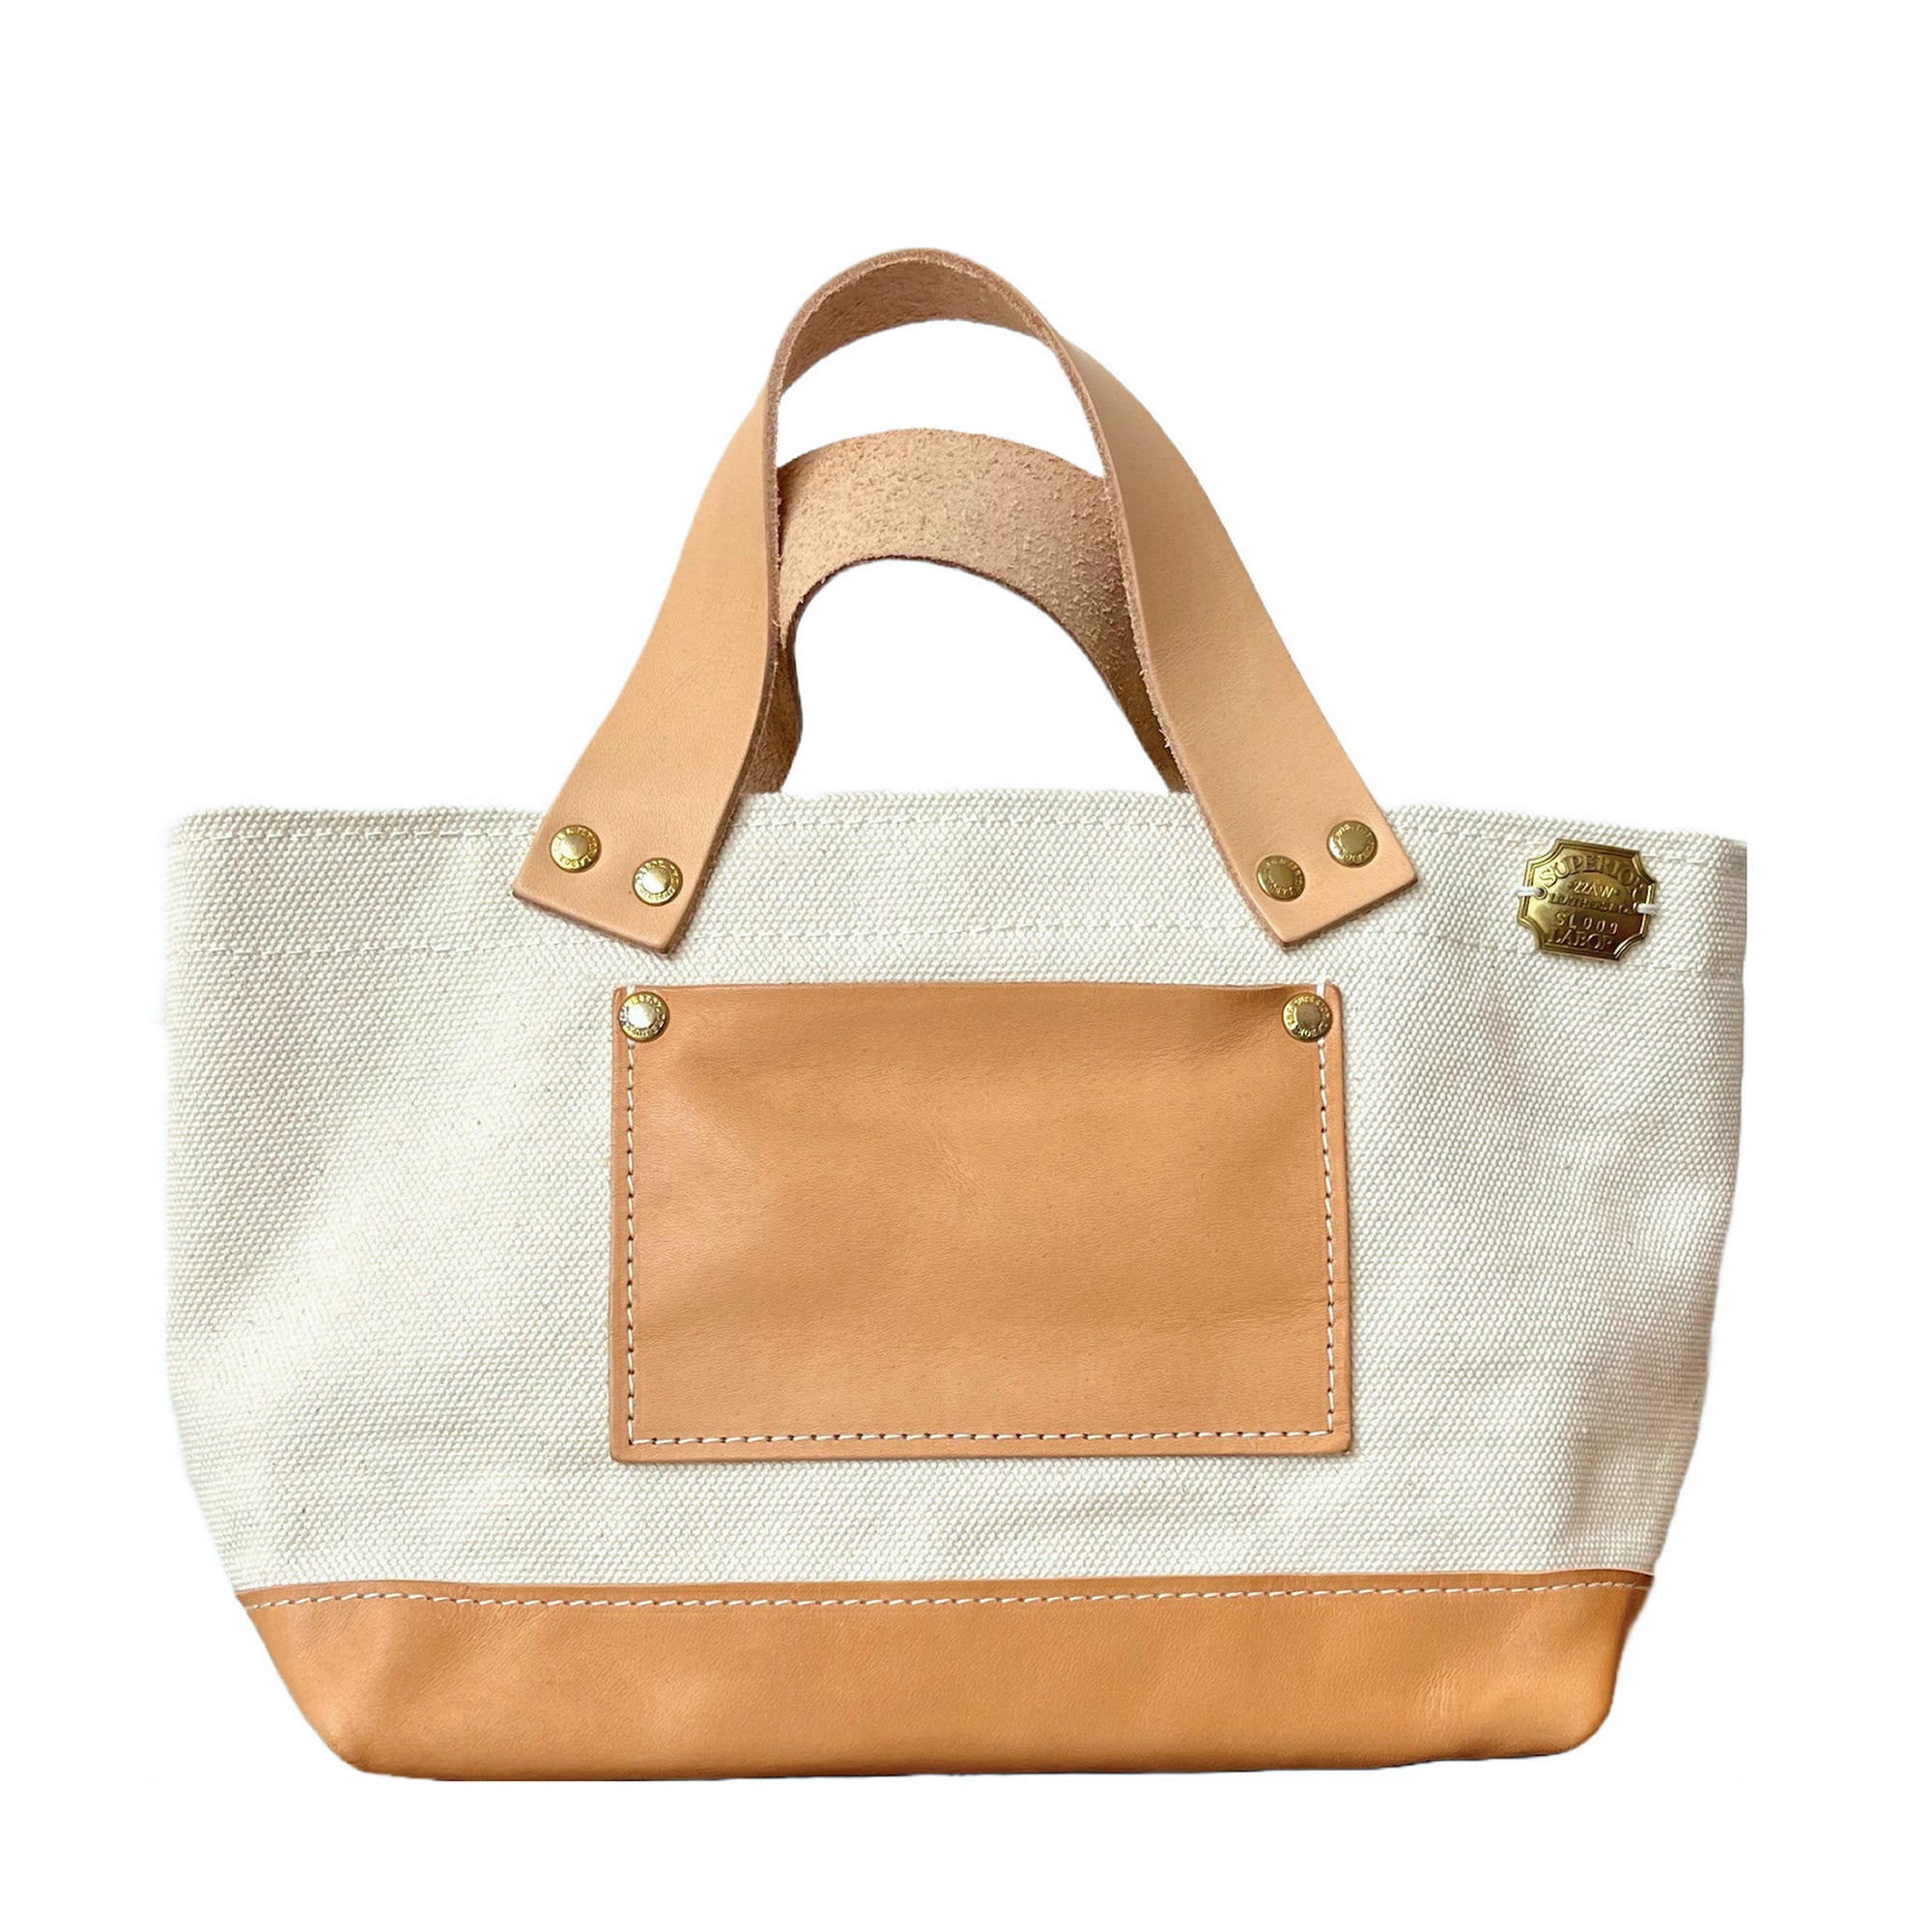 The Superior Labor Engineer Bag Petite Ltd Edition natural canvas & leather